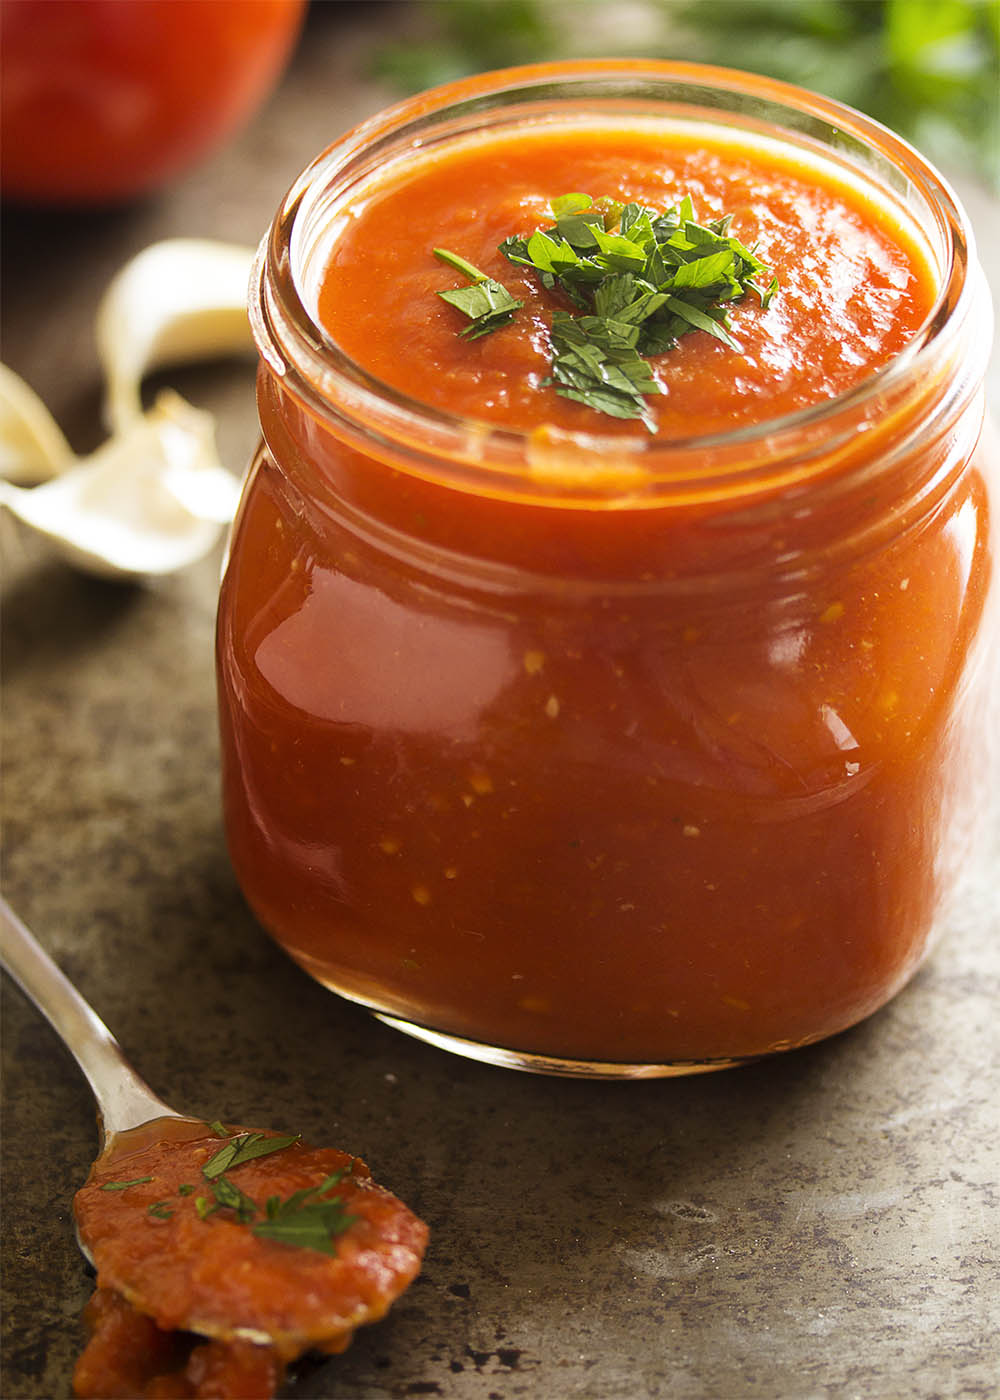 Discover the Delicious Marinara Sauce Ingredients for Your Italian Dish